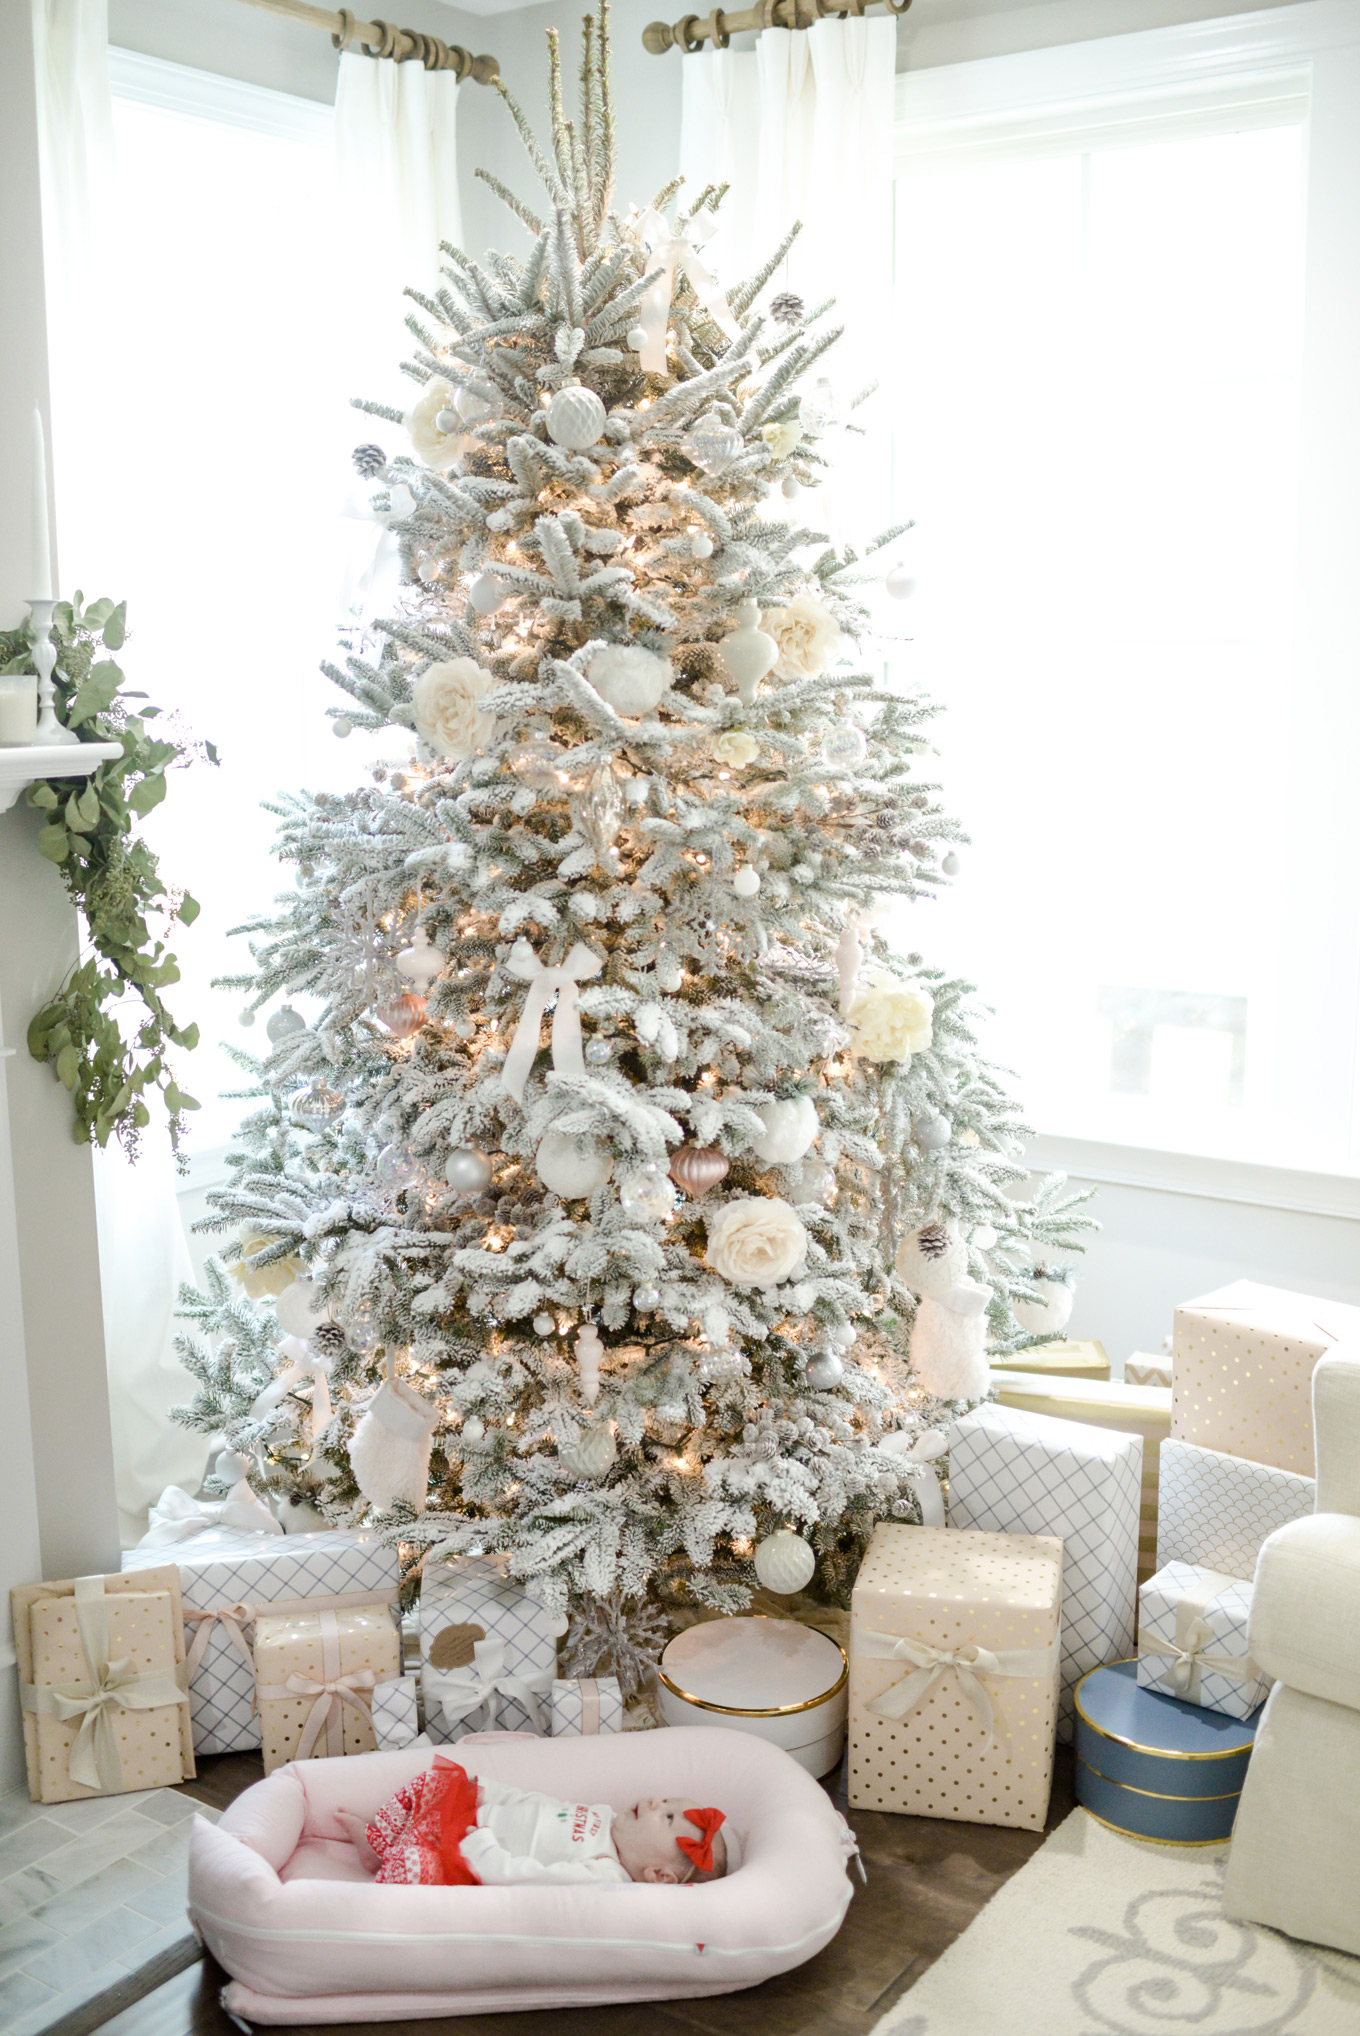 A baby and presents | Lifestyle Blogger Elle Bowes shares holiday home decor ideas.